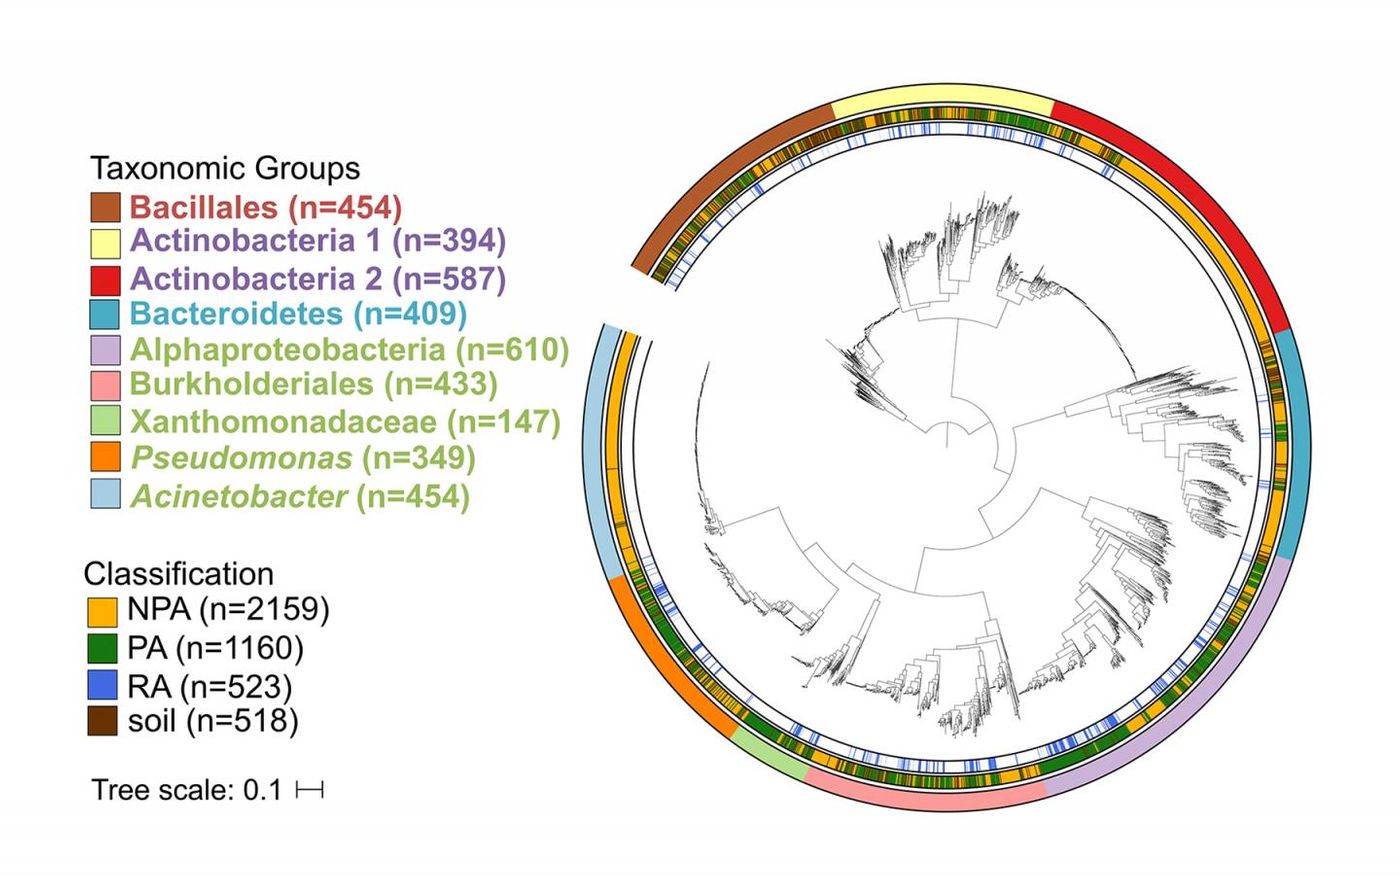 This image depicts a phylogenetic tree of over 3,800 high quality and non-redundant bacterial genomes. Outer ring denotes the taxonomic group, central ring denotes the isolation source, and inner ring denotes the root-associated genomes within plant-associated genomes. Taxon names are color-coded based on phylum: green - Proteobacteria, red - Firmicutes, blue -Bacteroidetes, purple - Actinobacteria. / Credit: Asaf Levy, JGI